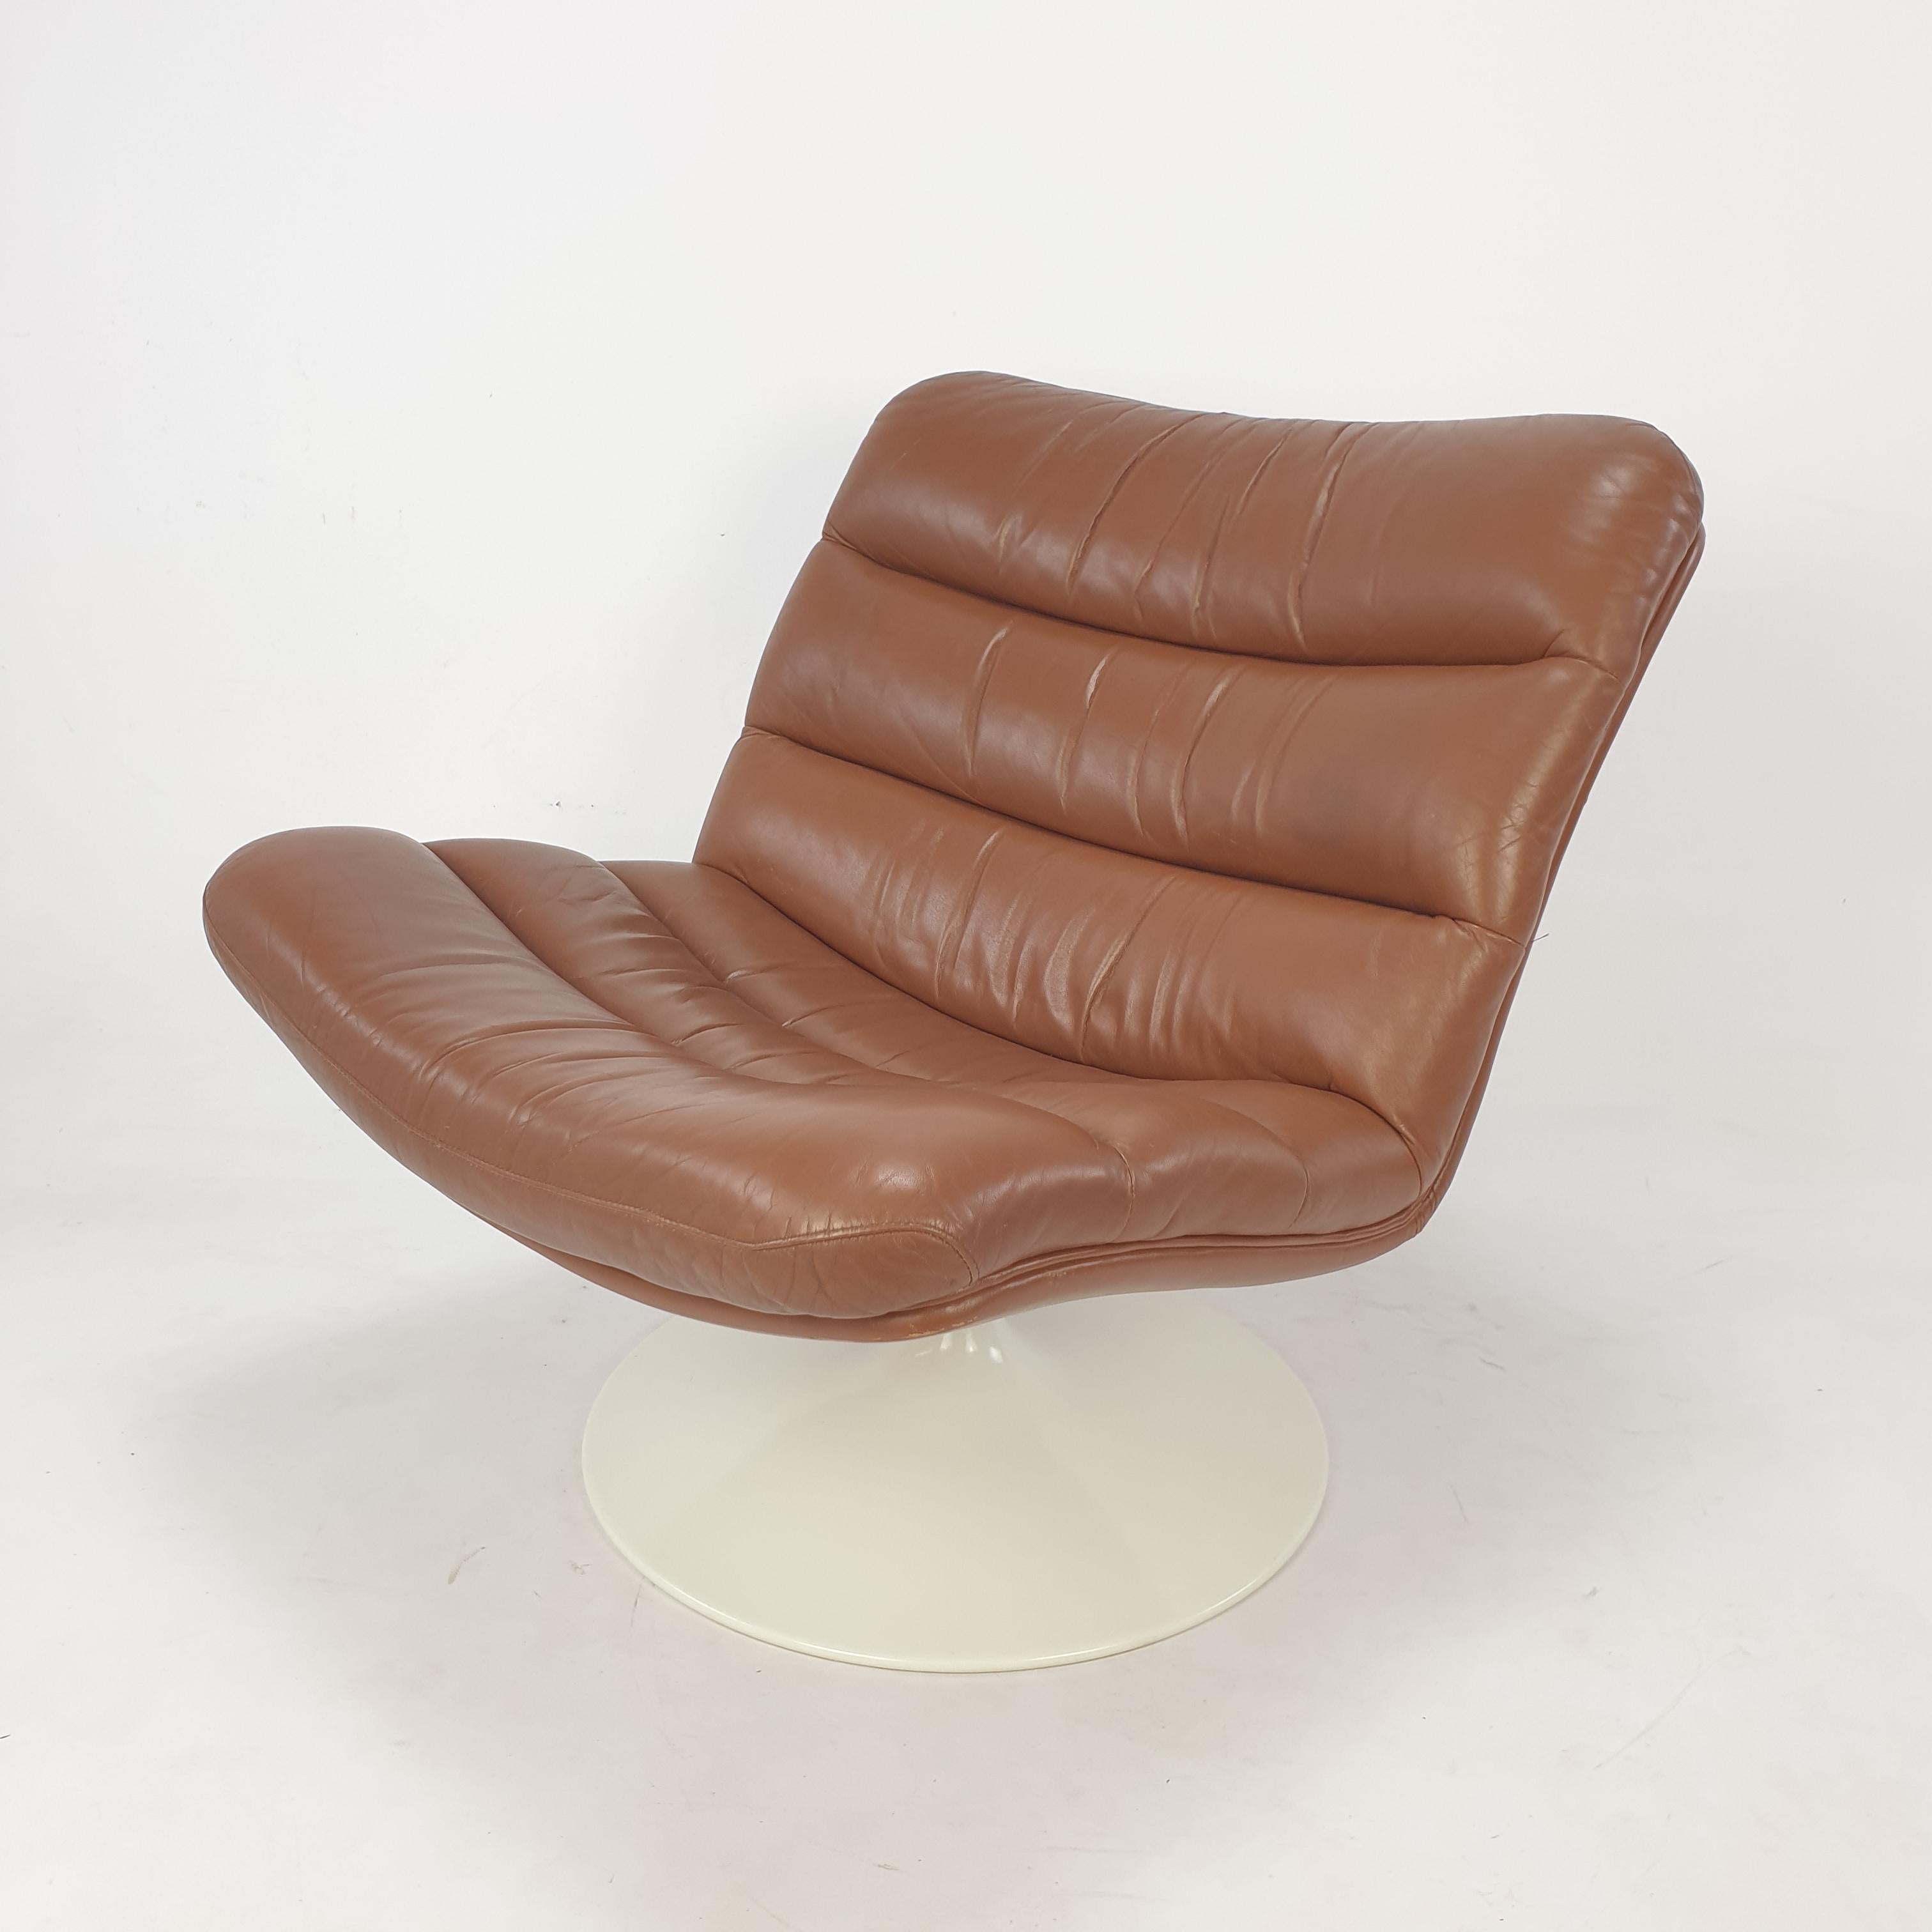 Very comfortable lounge chair designed by Geoffrey Harcourt for Artifort in the 60's.

It has a white rotating foot. 

The original high quality brown leather has a lovely patina. 

This chair is made of the best materials and is very solid.